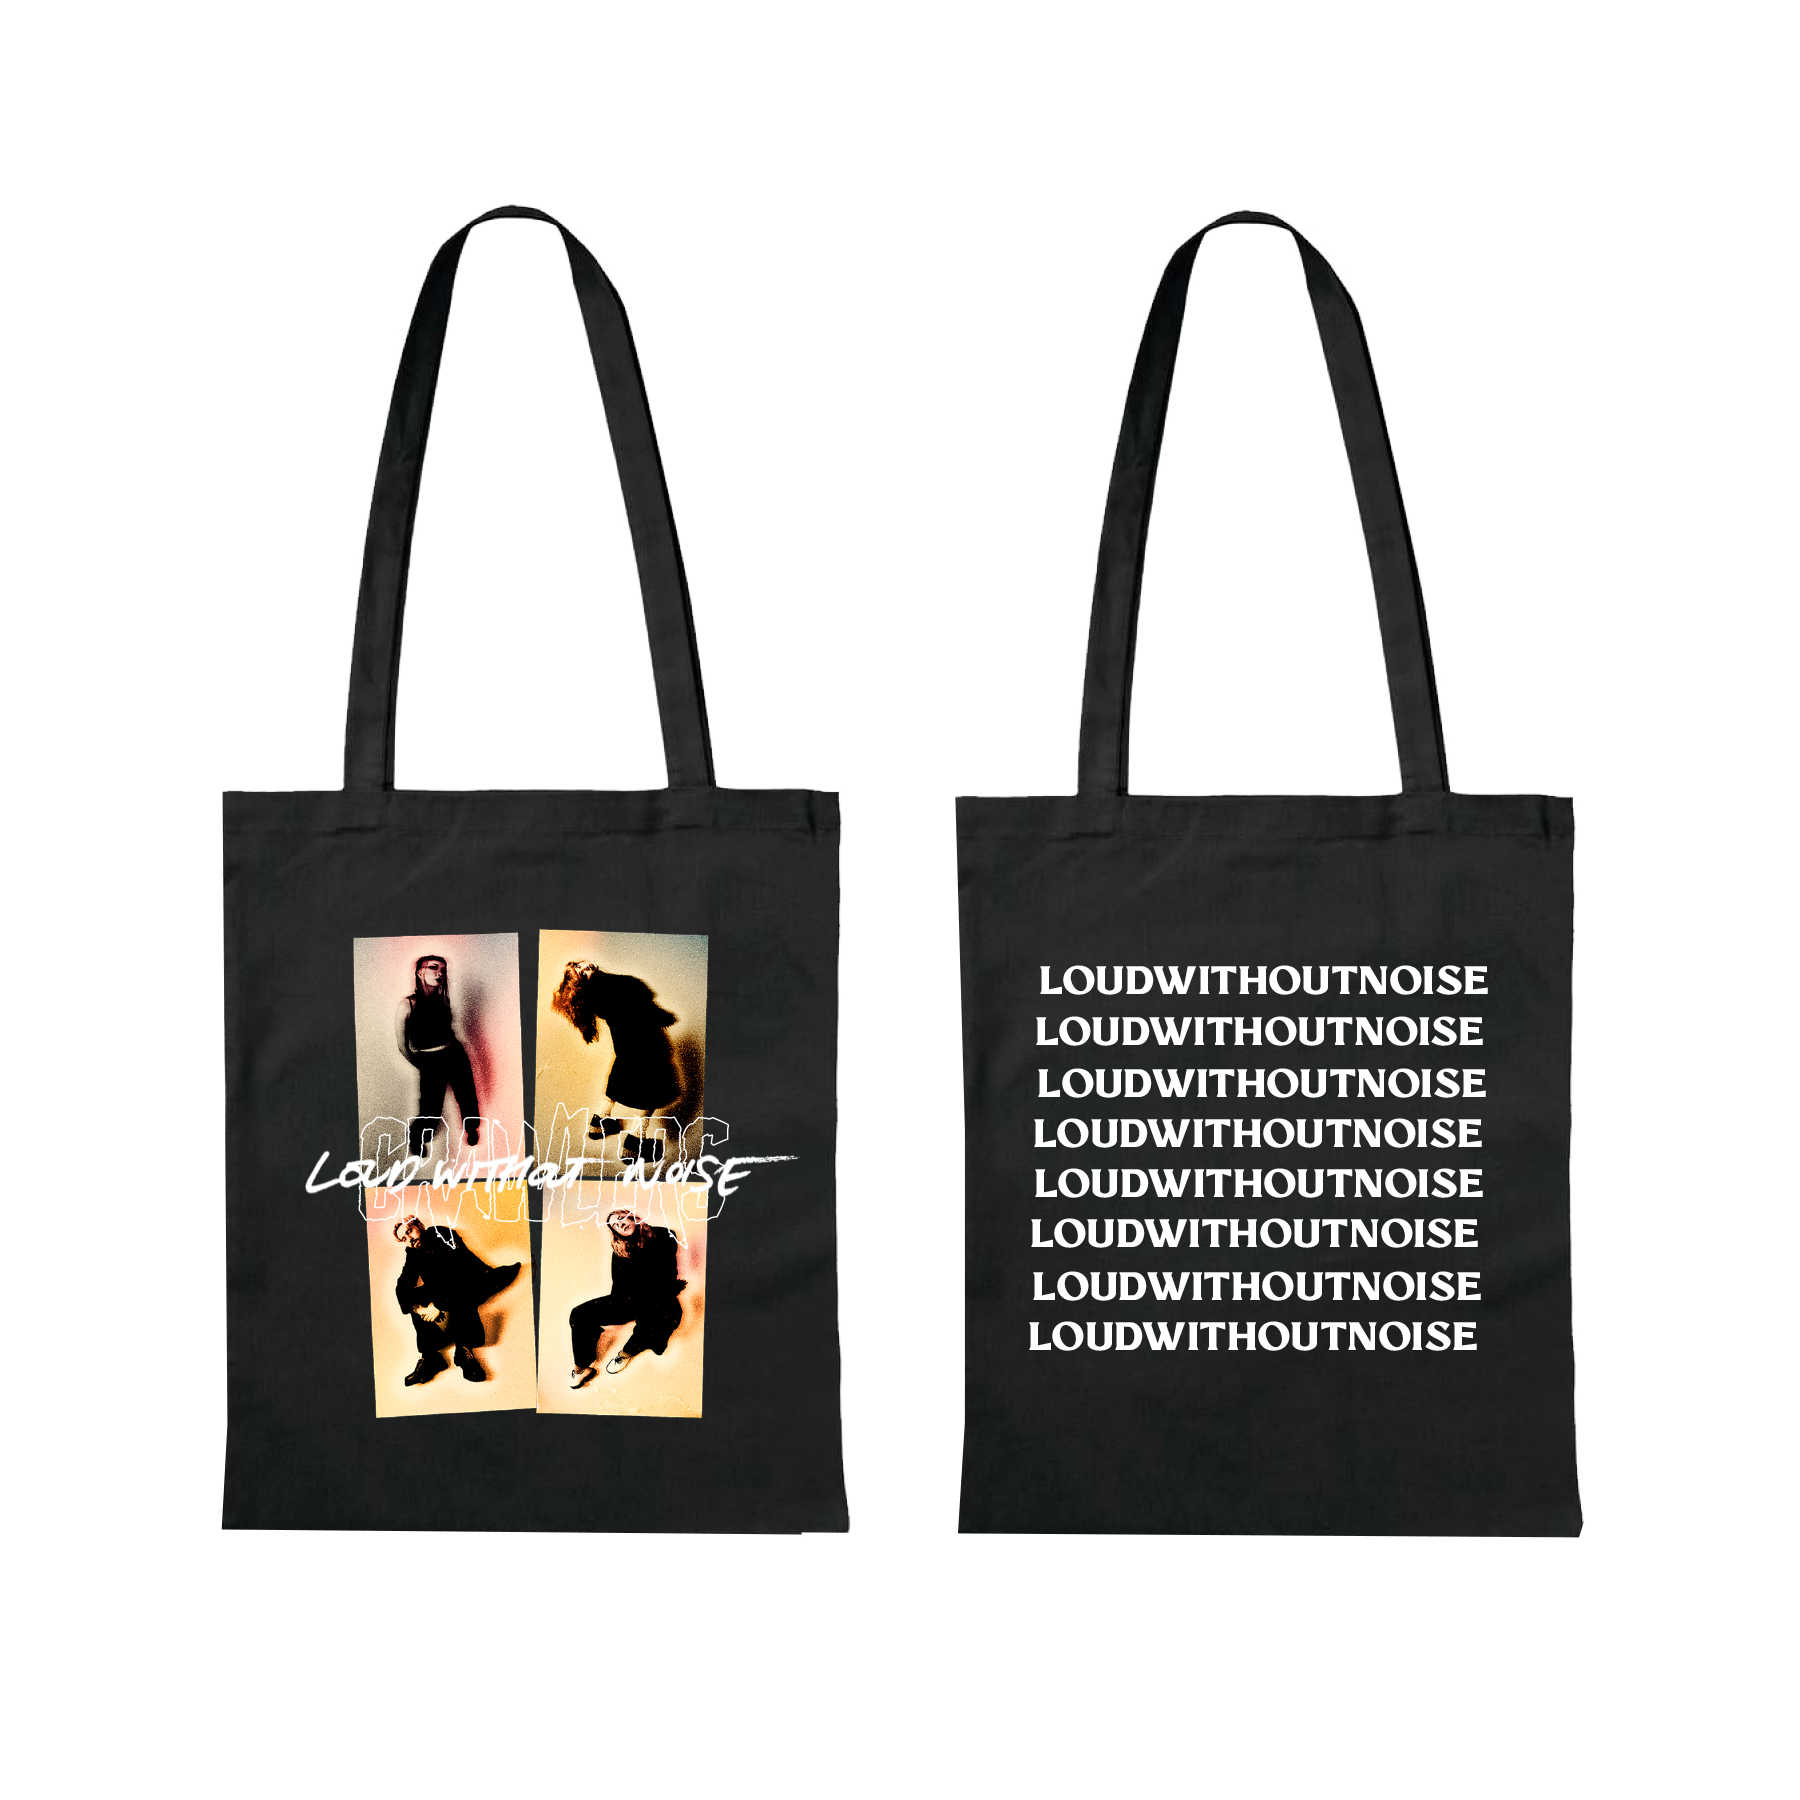 Crawlers - Black ‘loud without noise’ graphic print tote bag